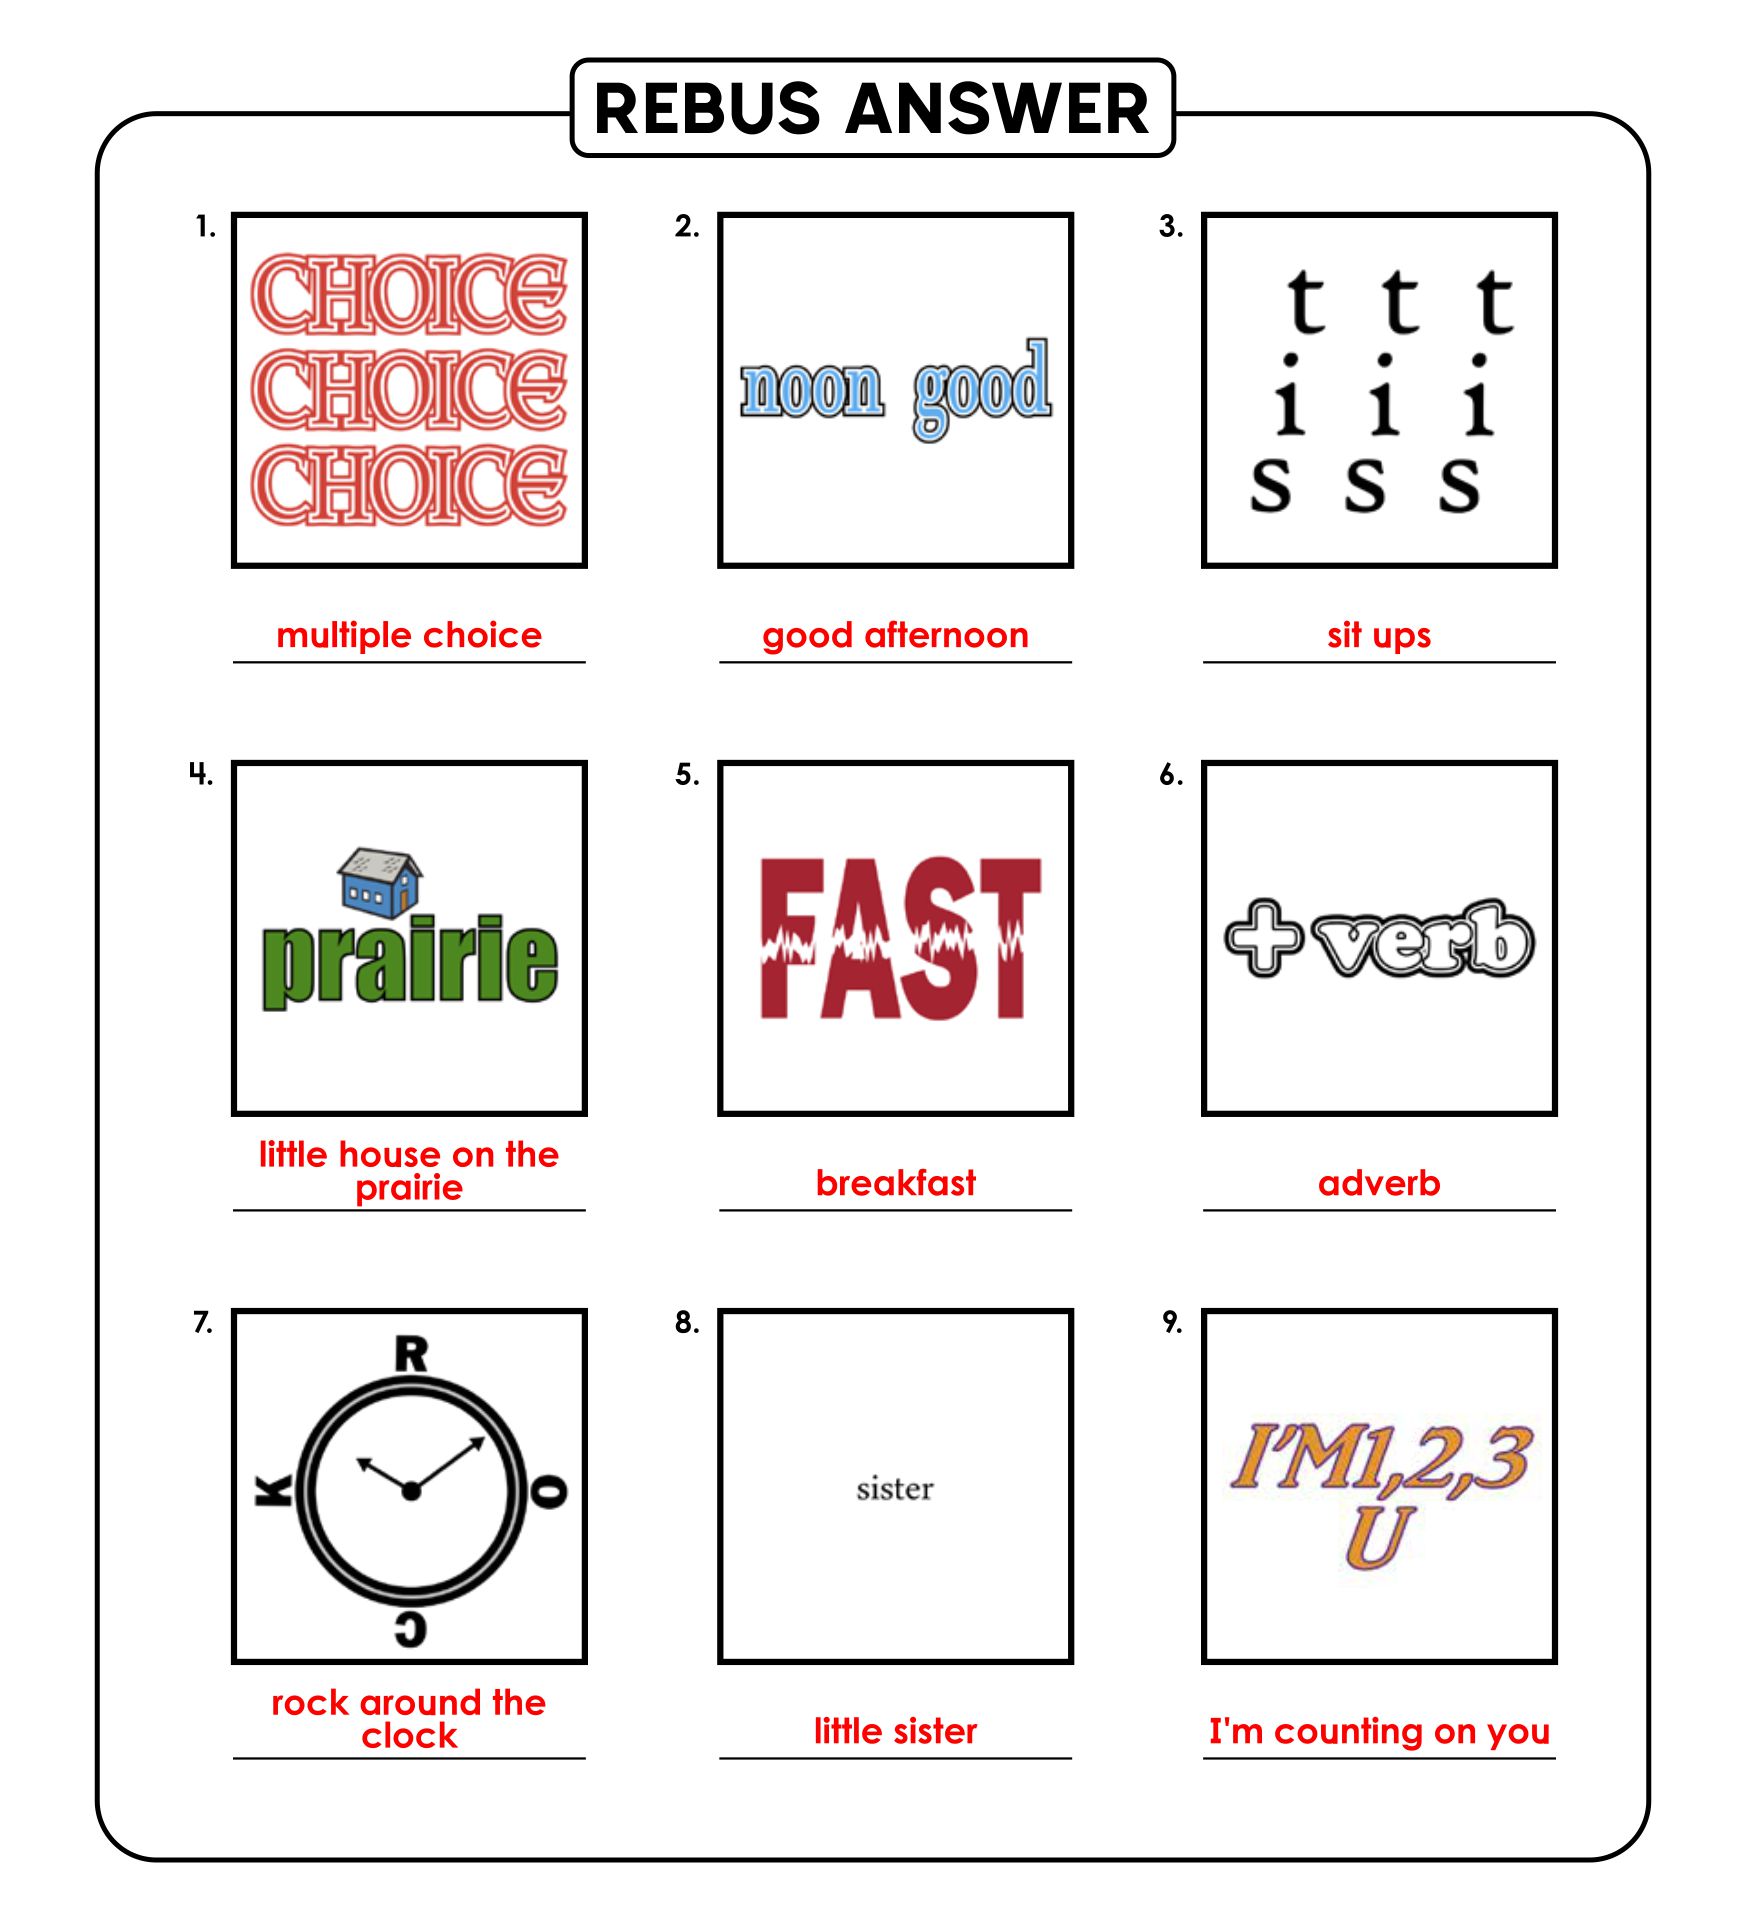 10 best printable rebus puzzles with answers printablee com